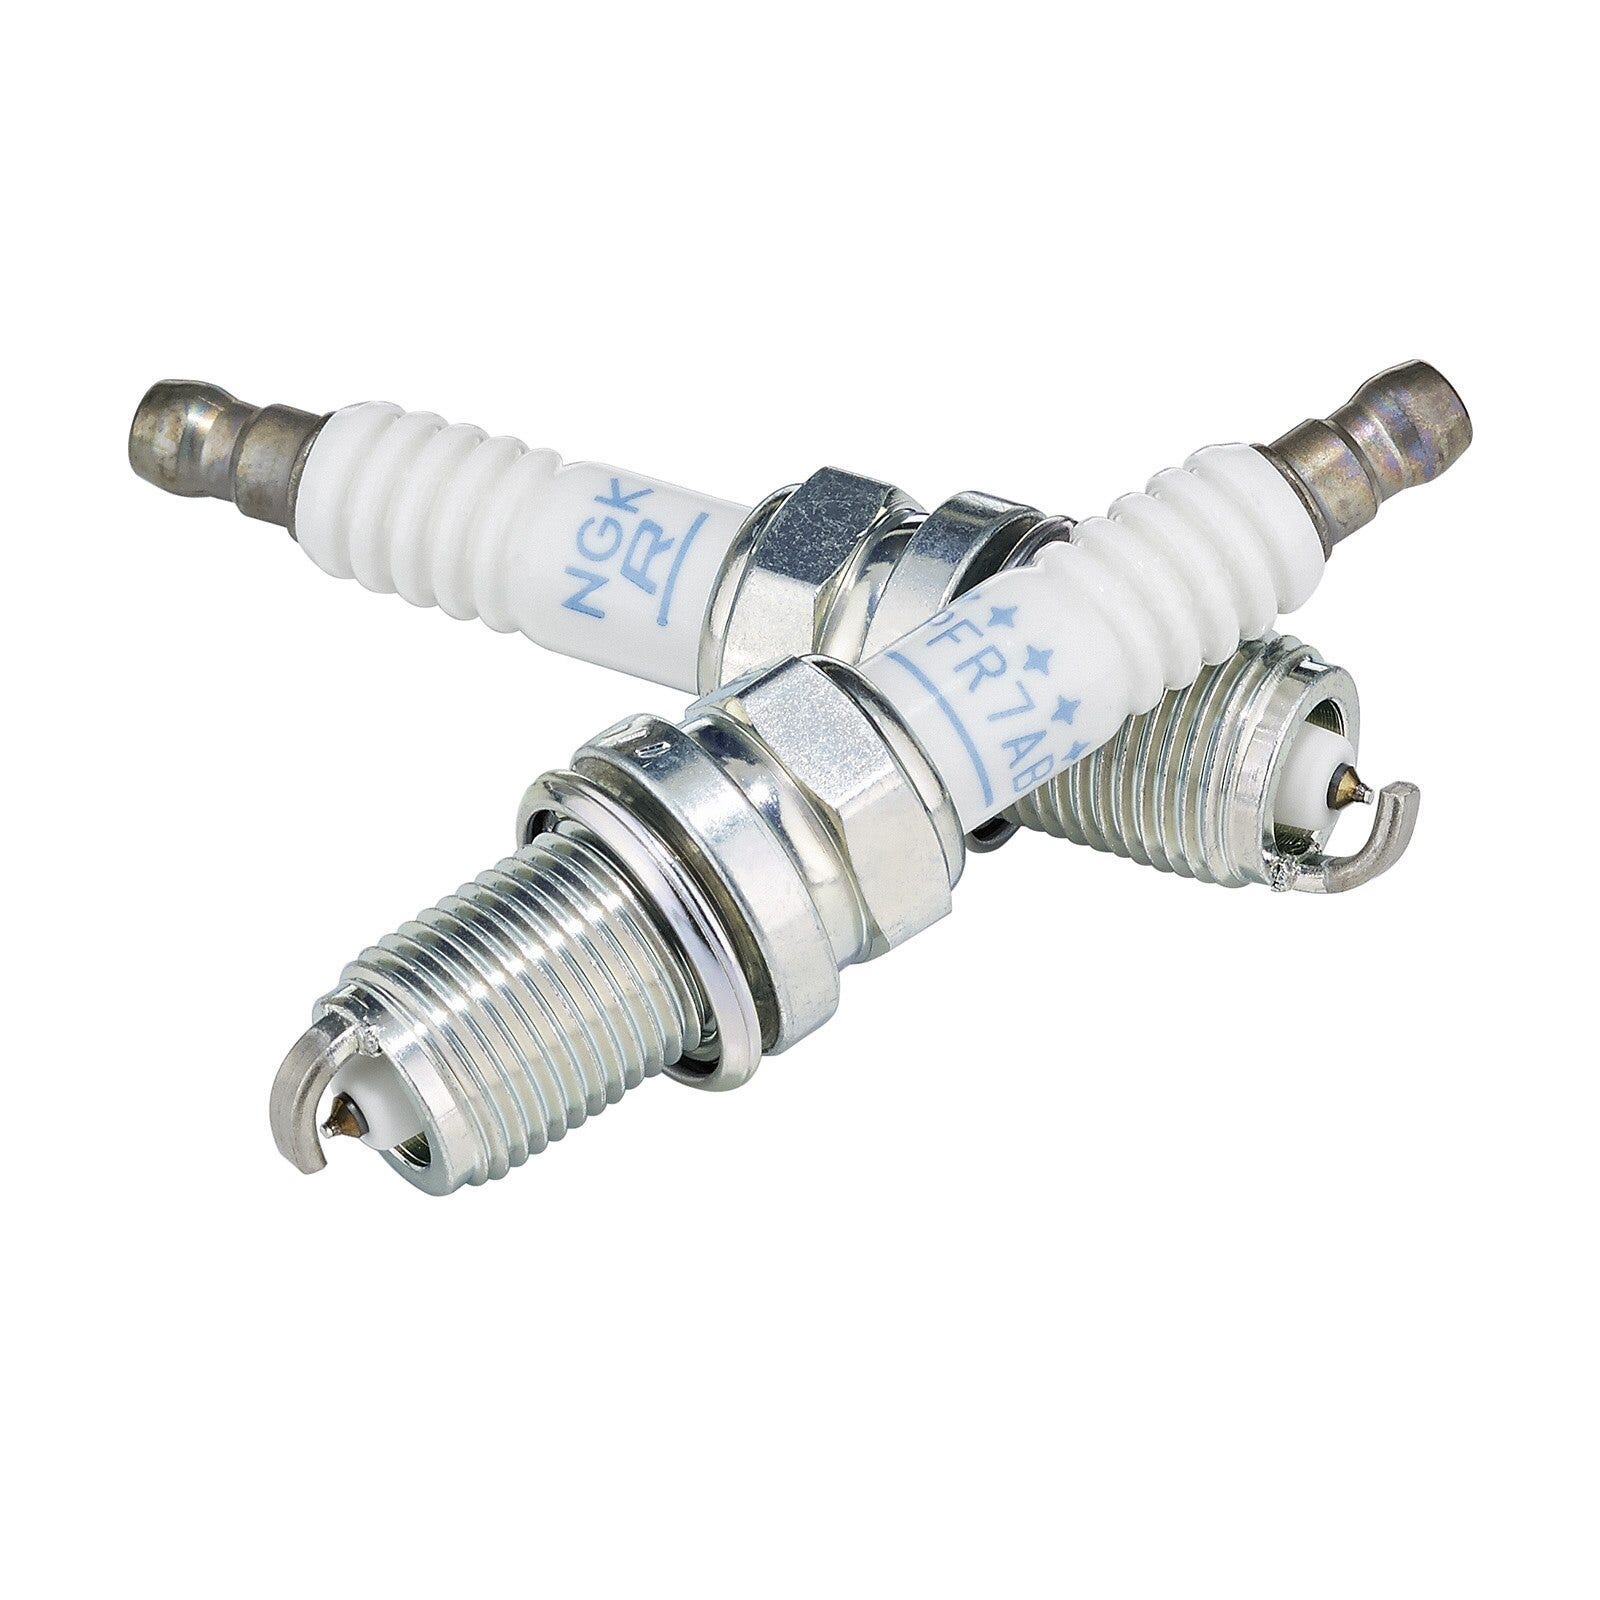 NGK Spark Plugs - 415129670 - The Parts Lodge